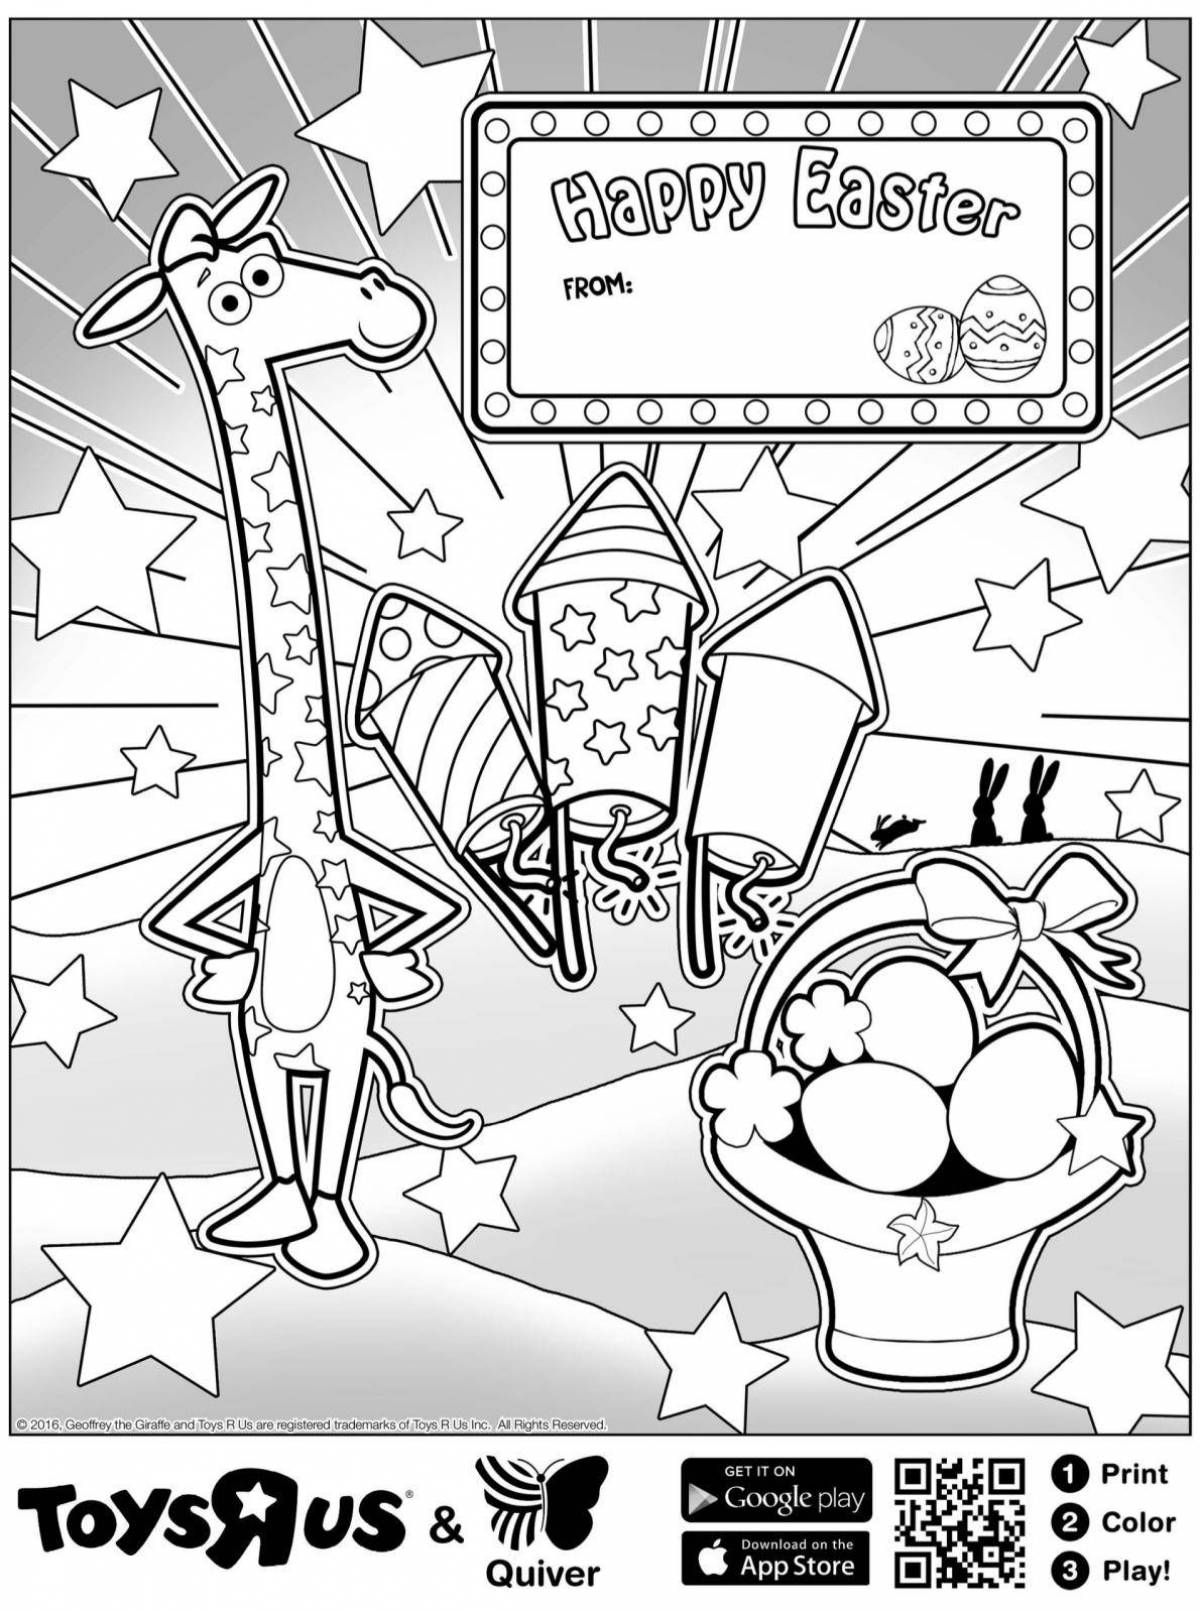 Dazzling quiver coloring page